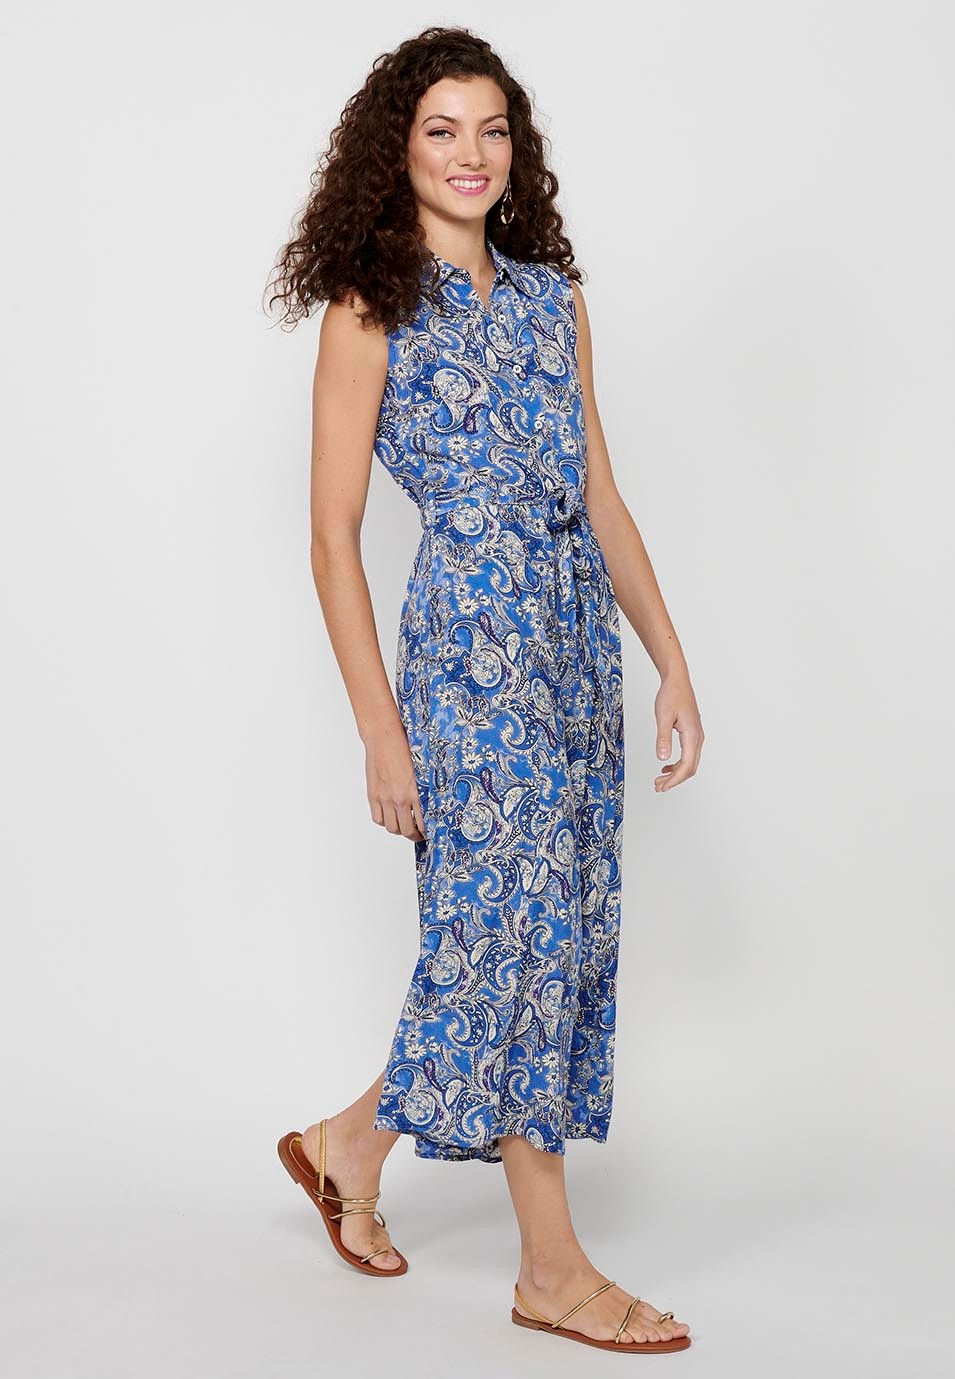 Long short-sleeved dress with floral print and front closure with buttons from the waist in Blue for Women 4